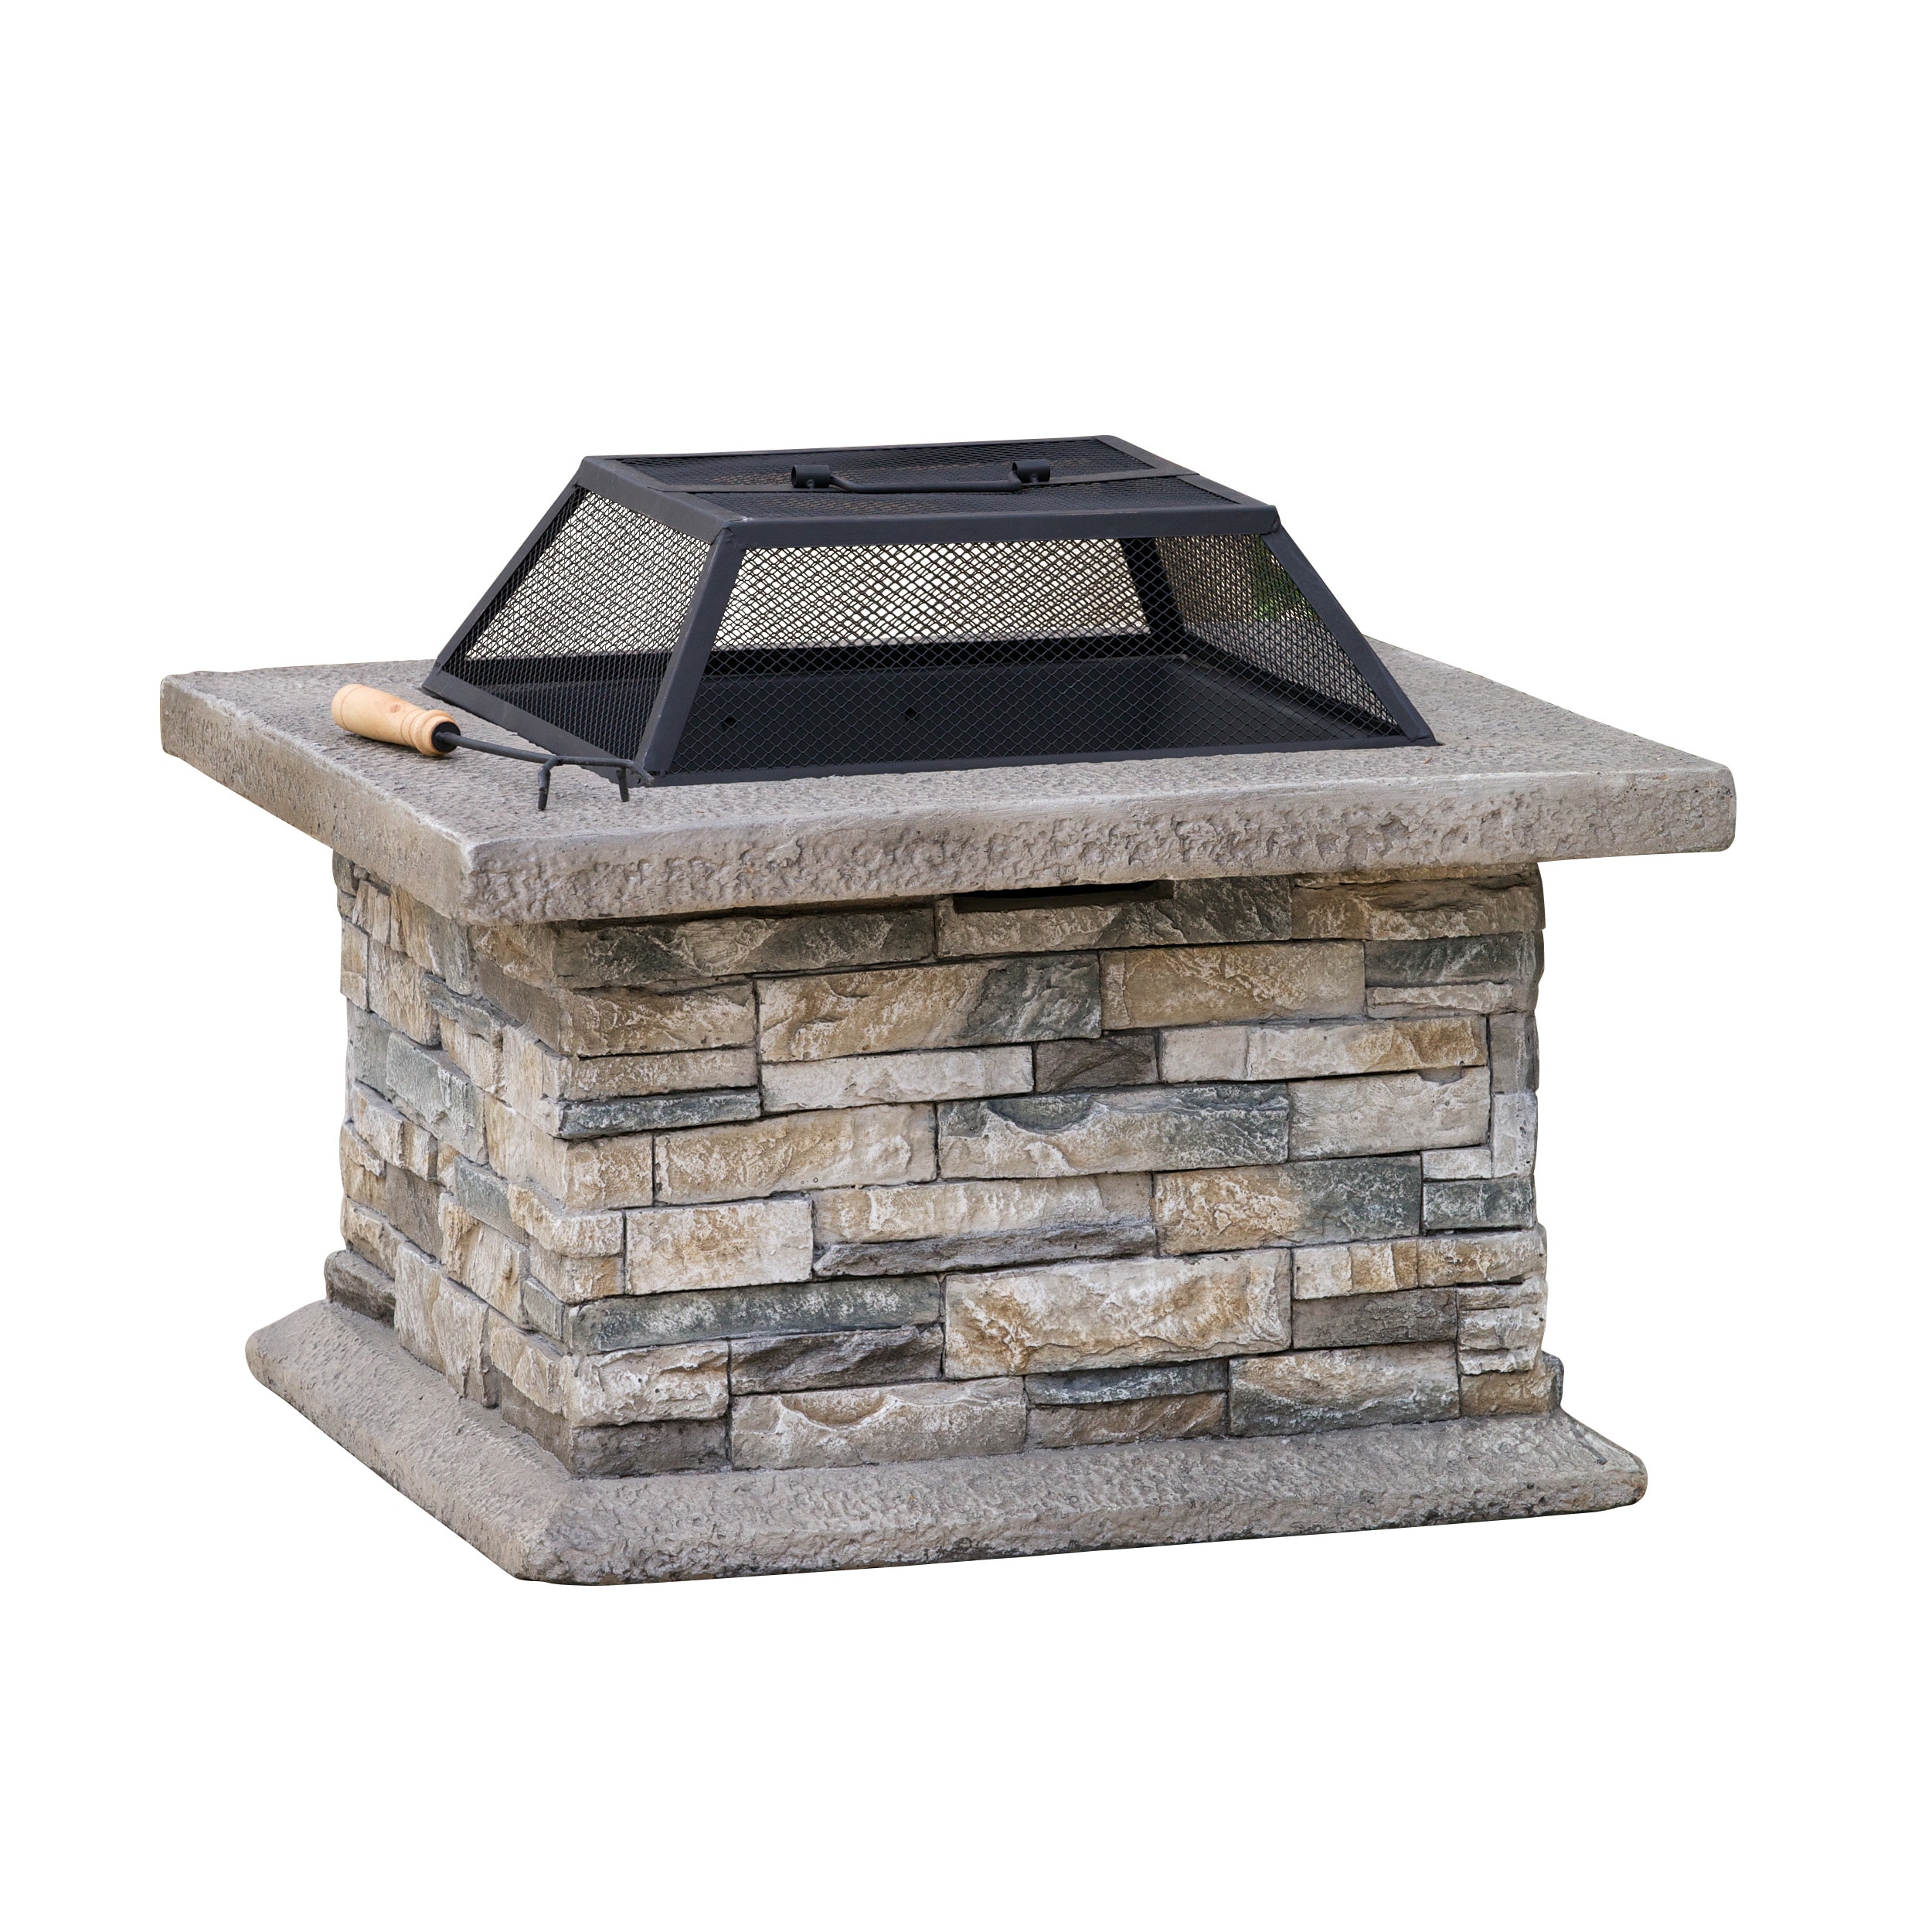 Best Selling Home Decor 29 In W Stone Cement Wood Burning Fire Pit In The Wood Burning Fire Pits Department At Lowes Com